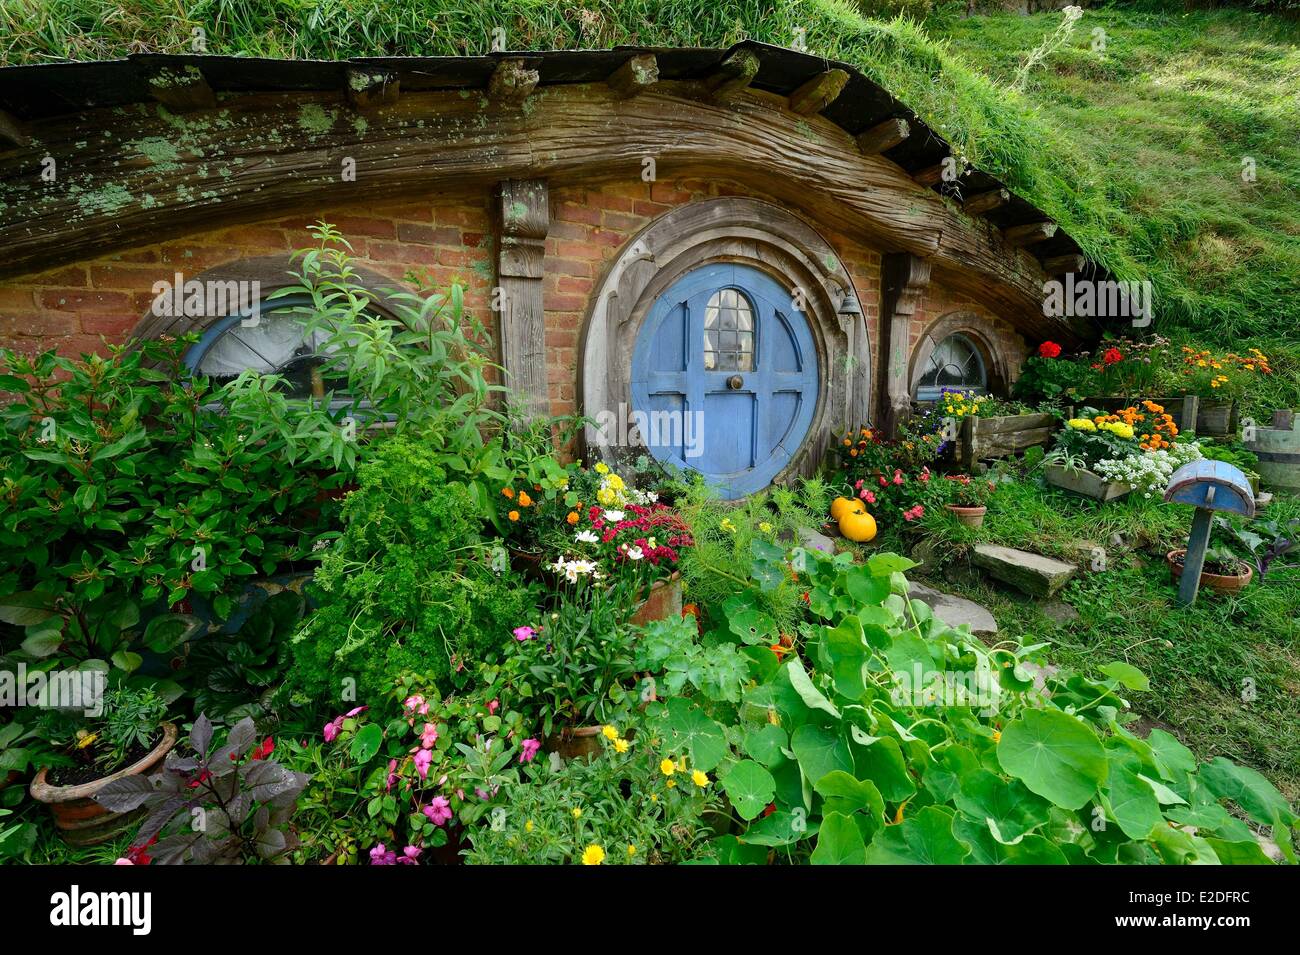 New Zealand North island Matamata Hobbiton the hobbit village built for the movie Lord of the Rings by Peter Jackson Stock Photo